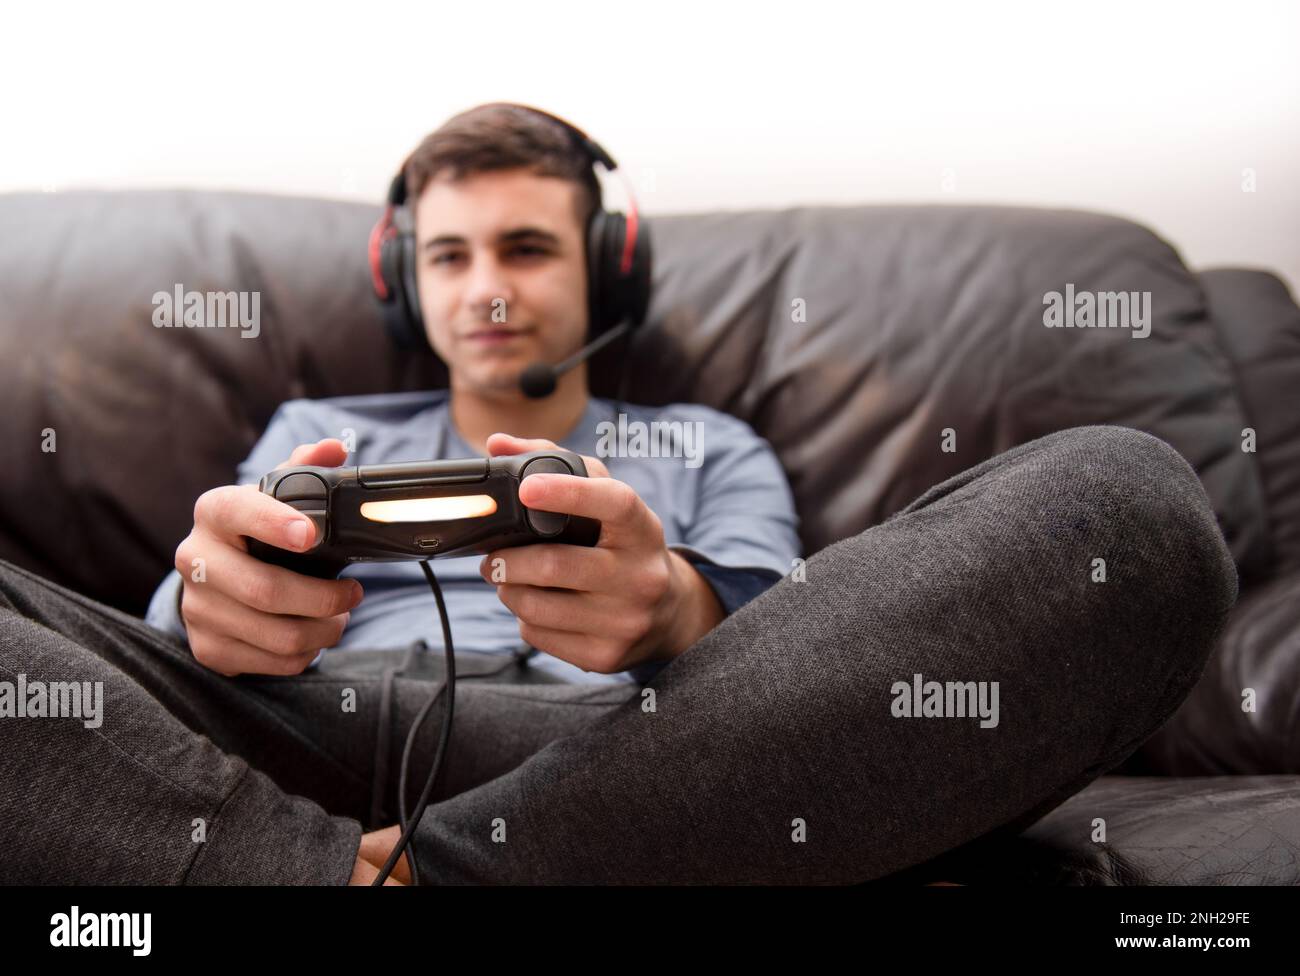 teenager playing video games at home sitting on couch Stock Photo